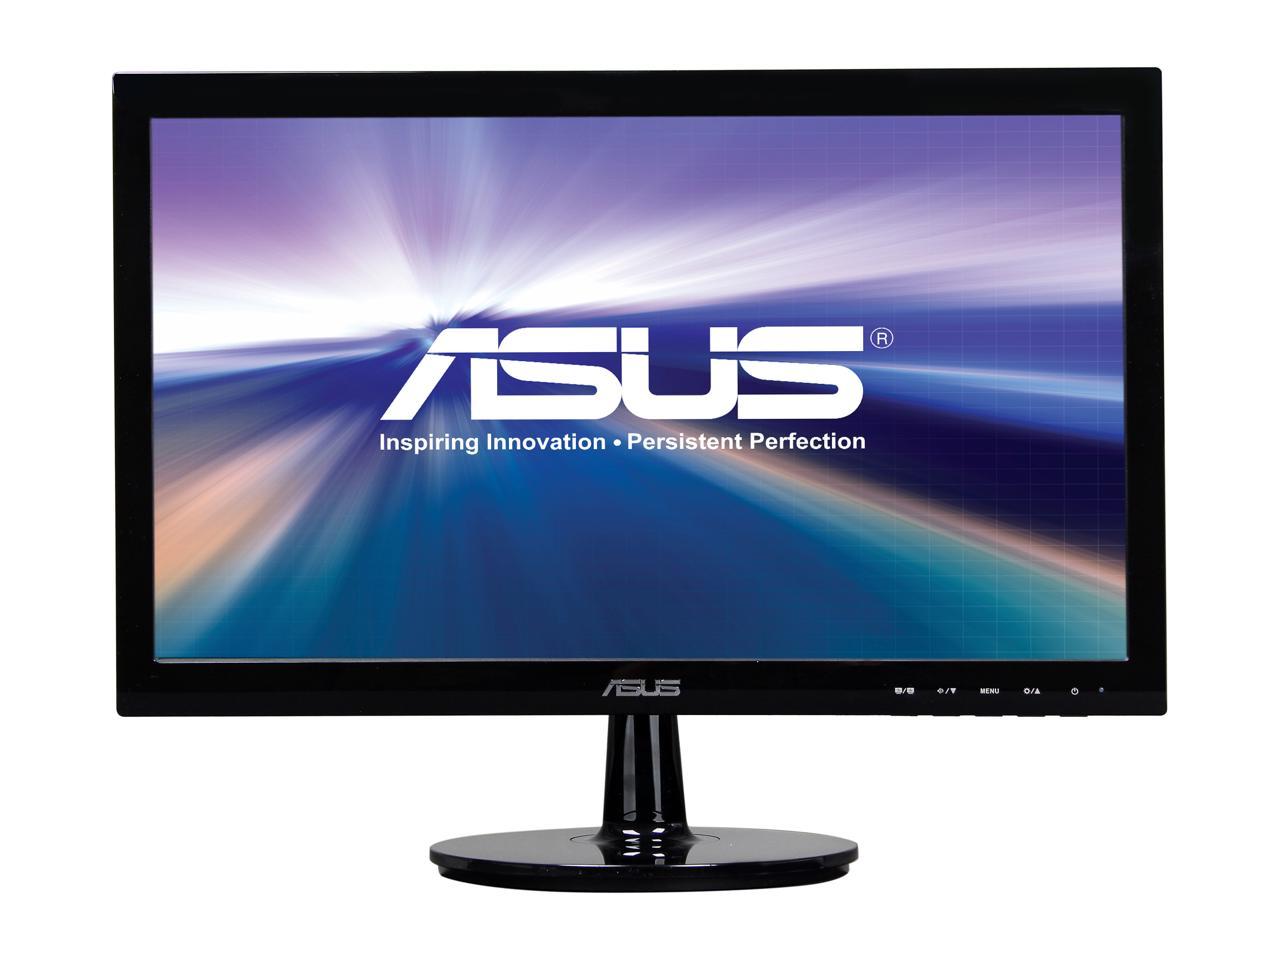 ASUS VS197T-P 19" (Actaul size 18.5") 1366 x 768 D-Sub, DVI Built-in Speakers LCD Monitor